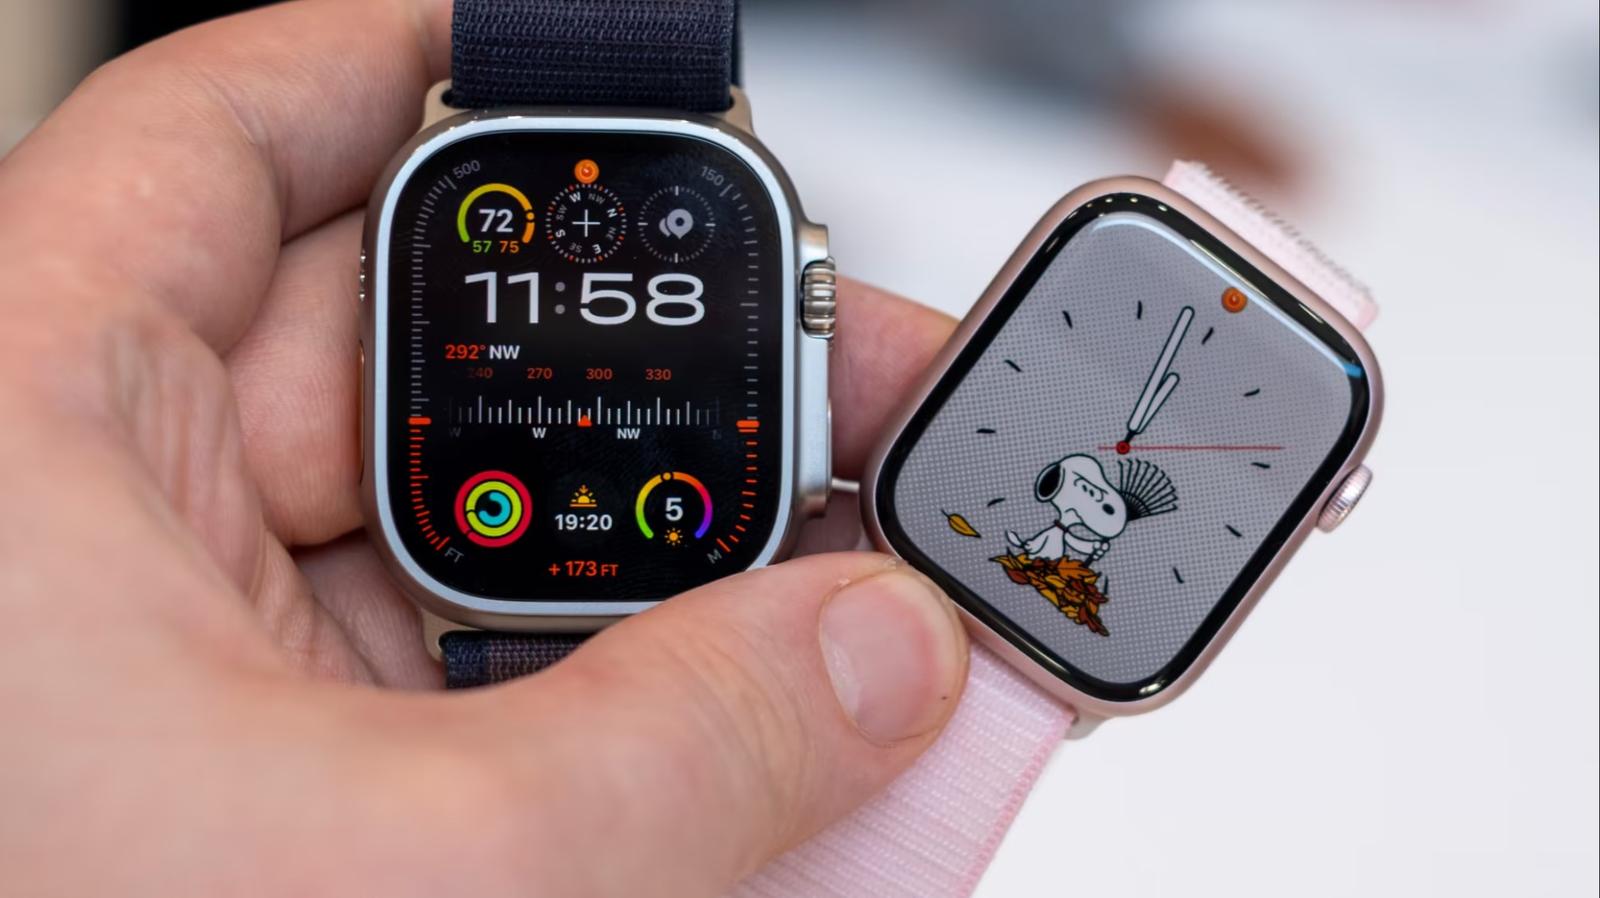 Apple Watch Battery Problems: Users Complain of 15-Minute Battery Life